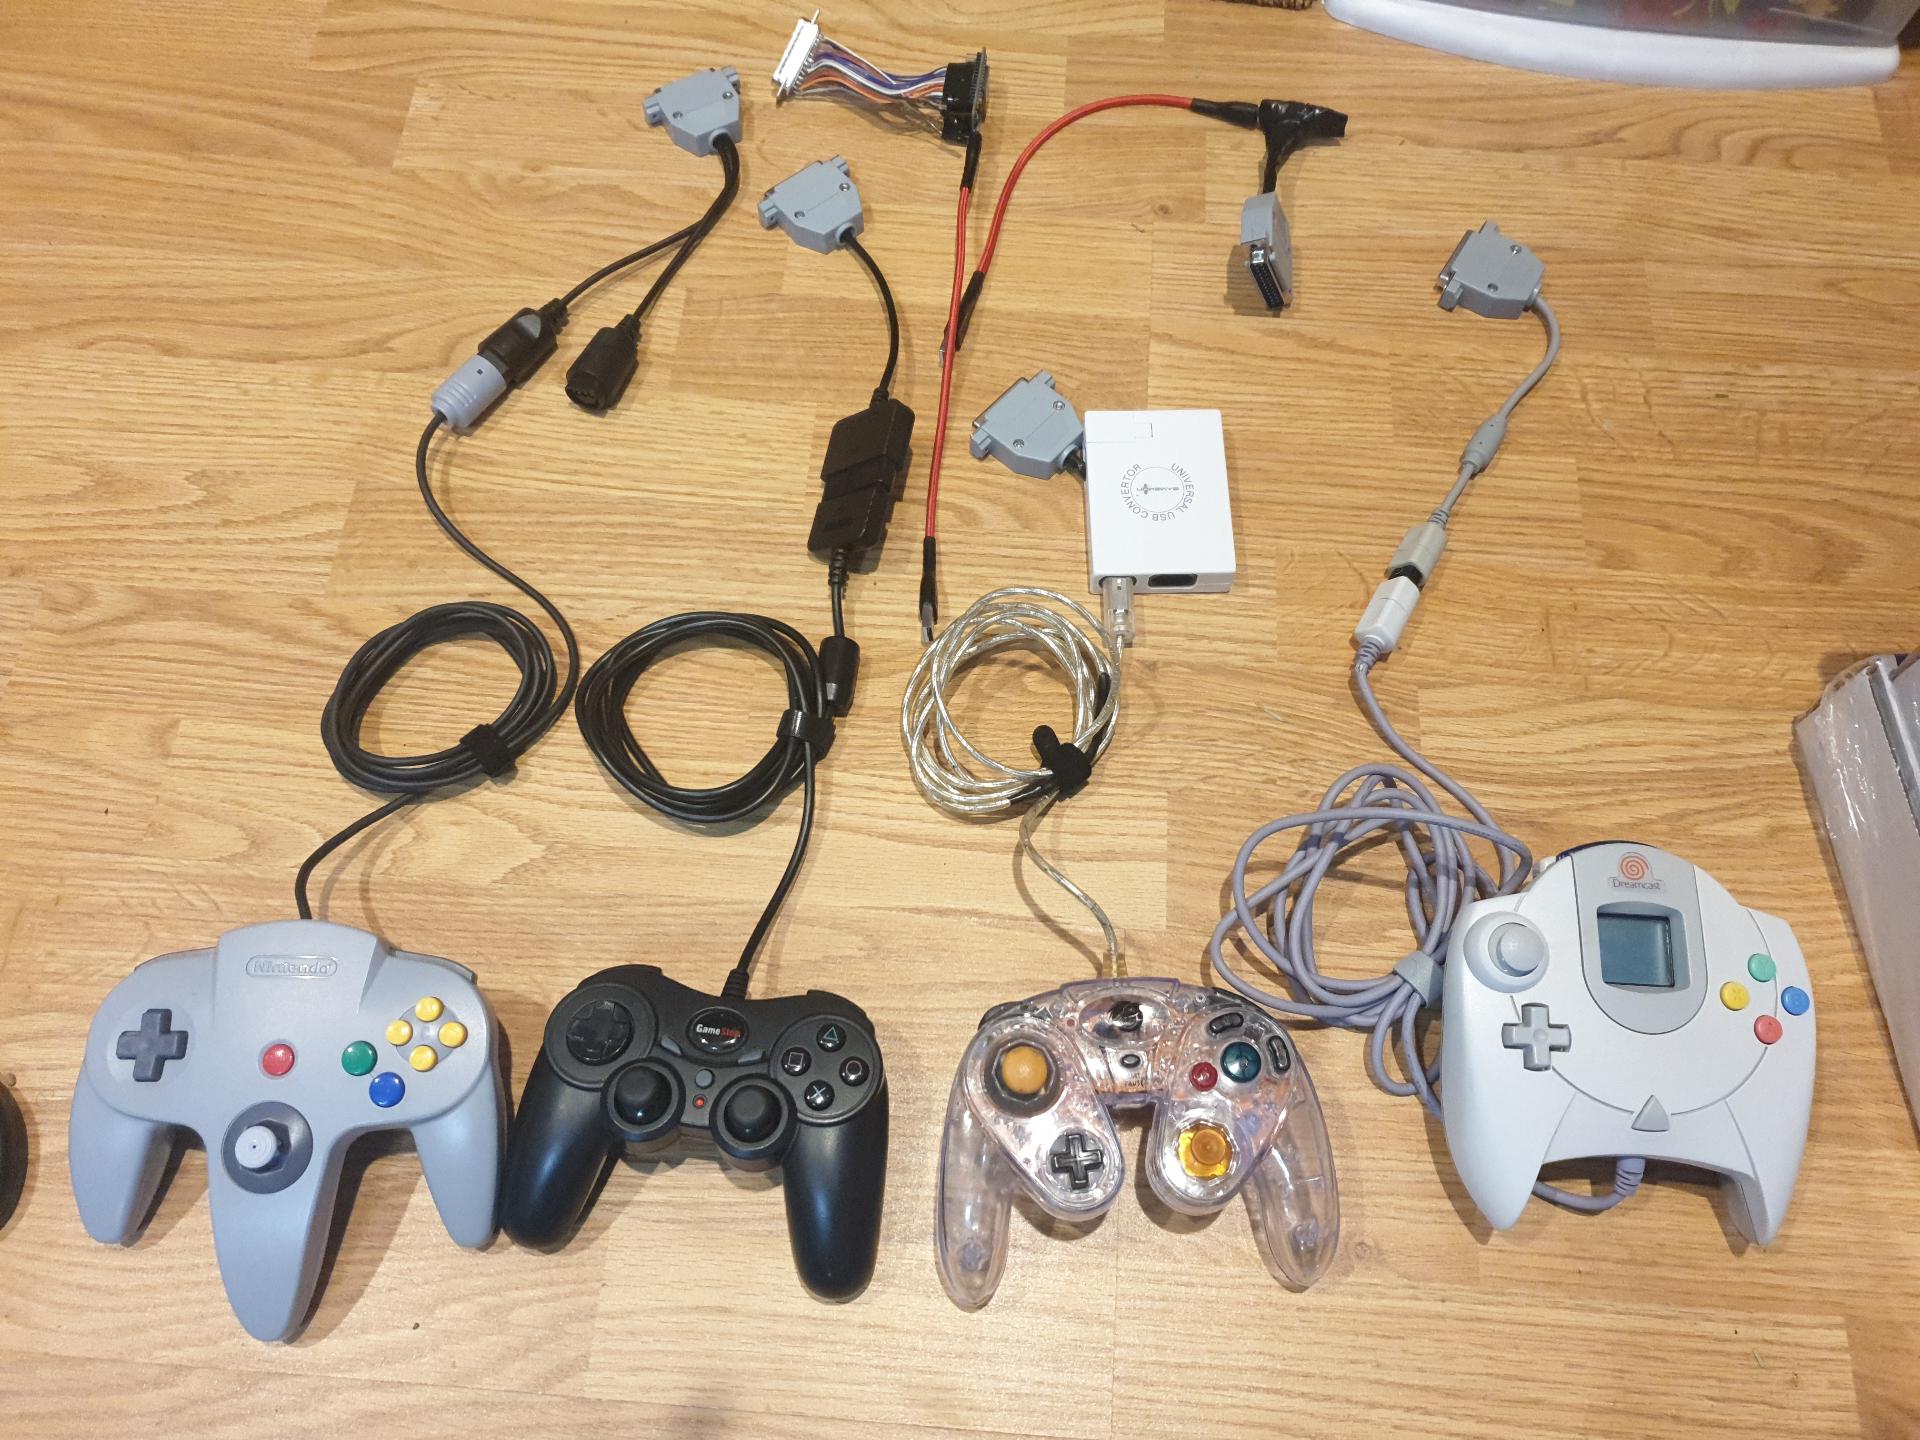 N64, PS2, GameCube, Dreamcast controllers